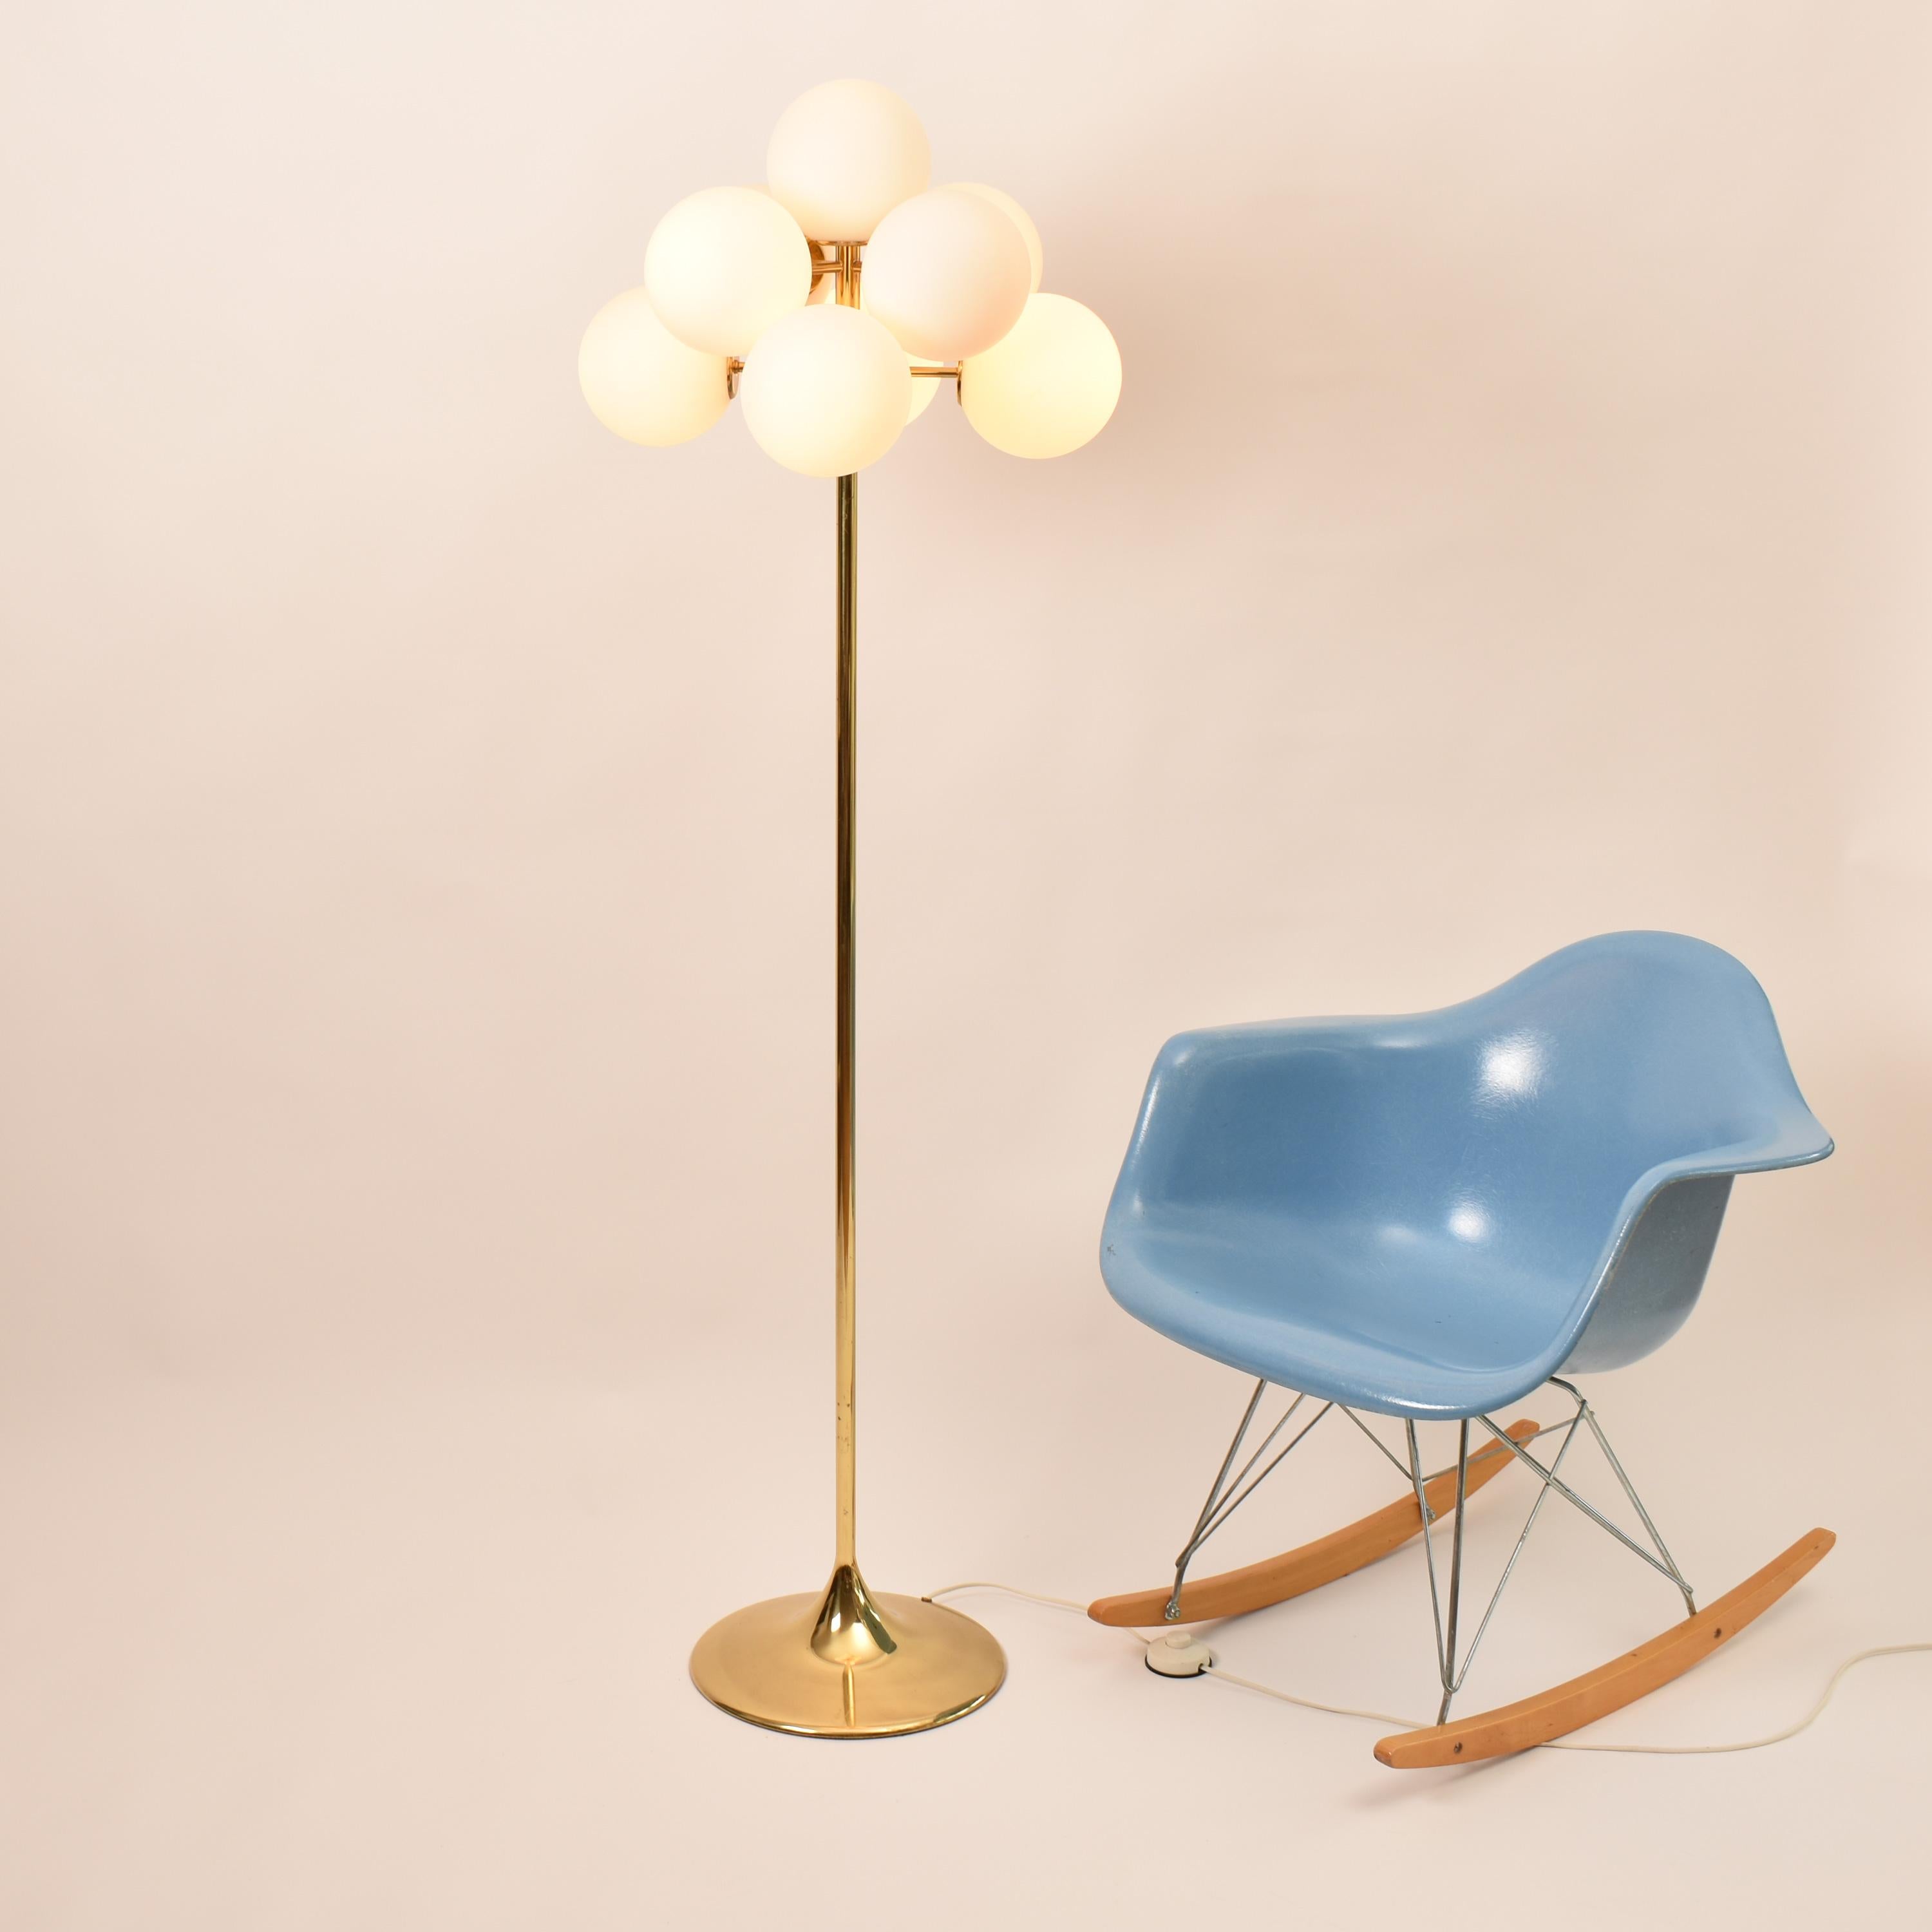 Mid-Century Modern Atomic Floor Lamp Gold and White By E.R. Nele for Temde 1960 5